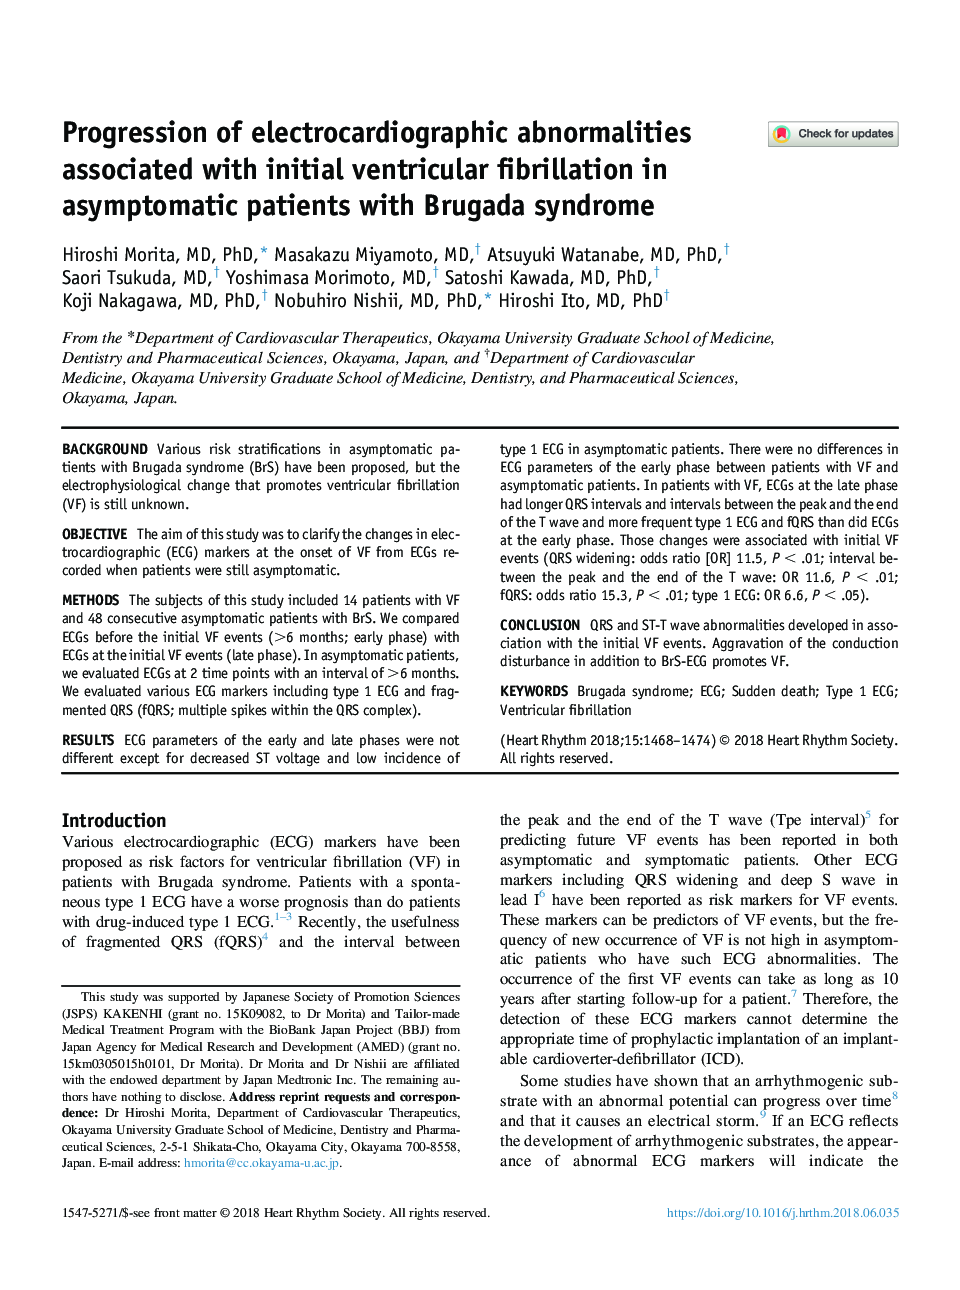 Progression of electrocardiographic abnormalities associated with initial ventricular fibrillation in asymptomatic patients with Brugada syndrome